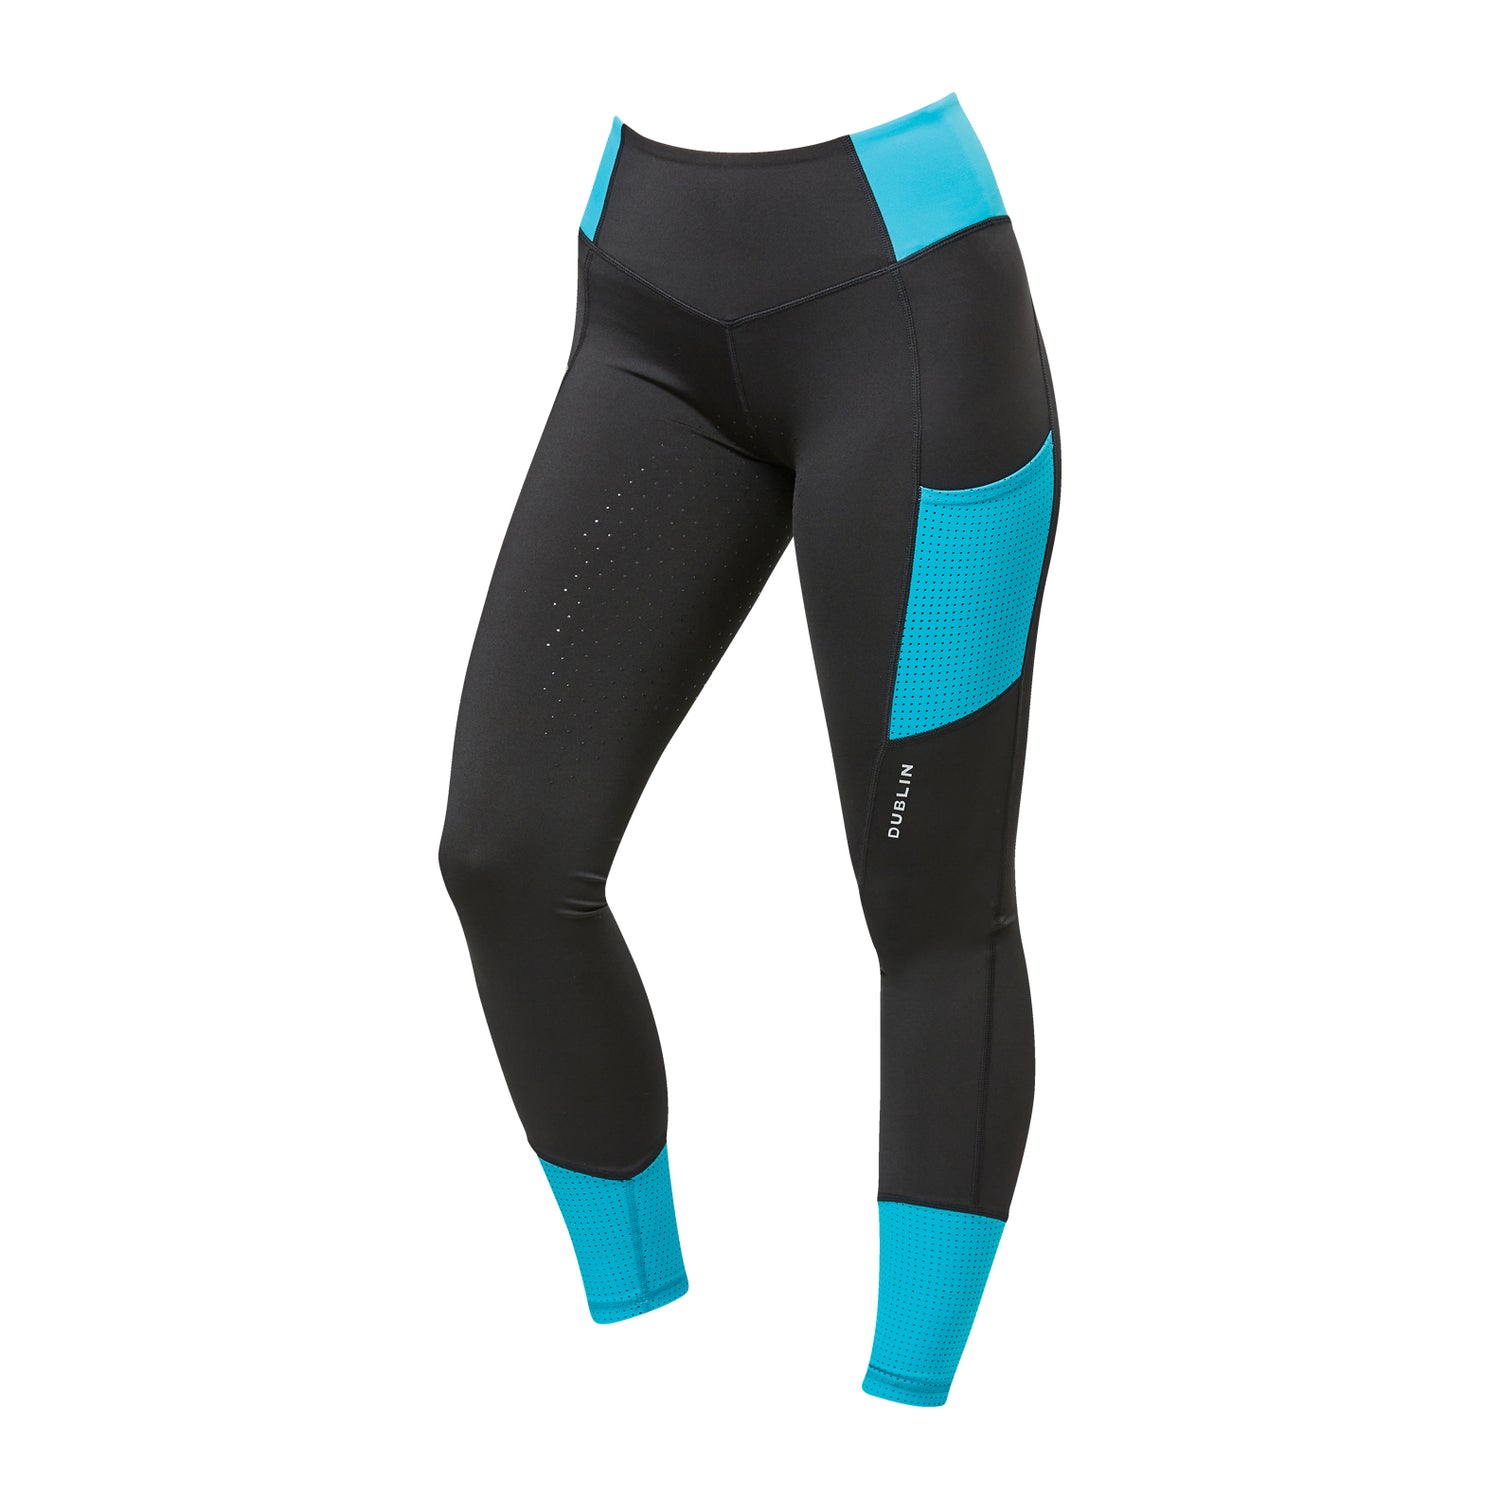 Dublin Power Forest New Performance Clothing Rise | Tights Colour Block Mid